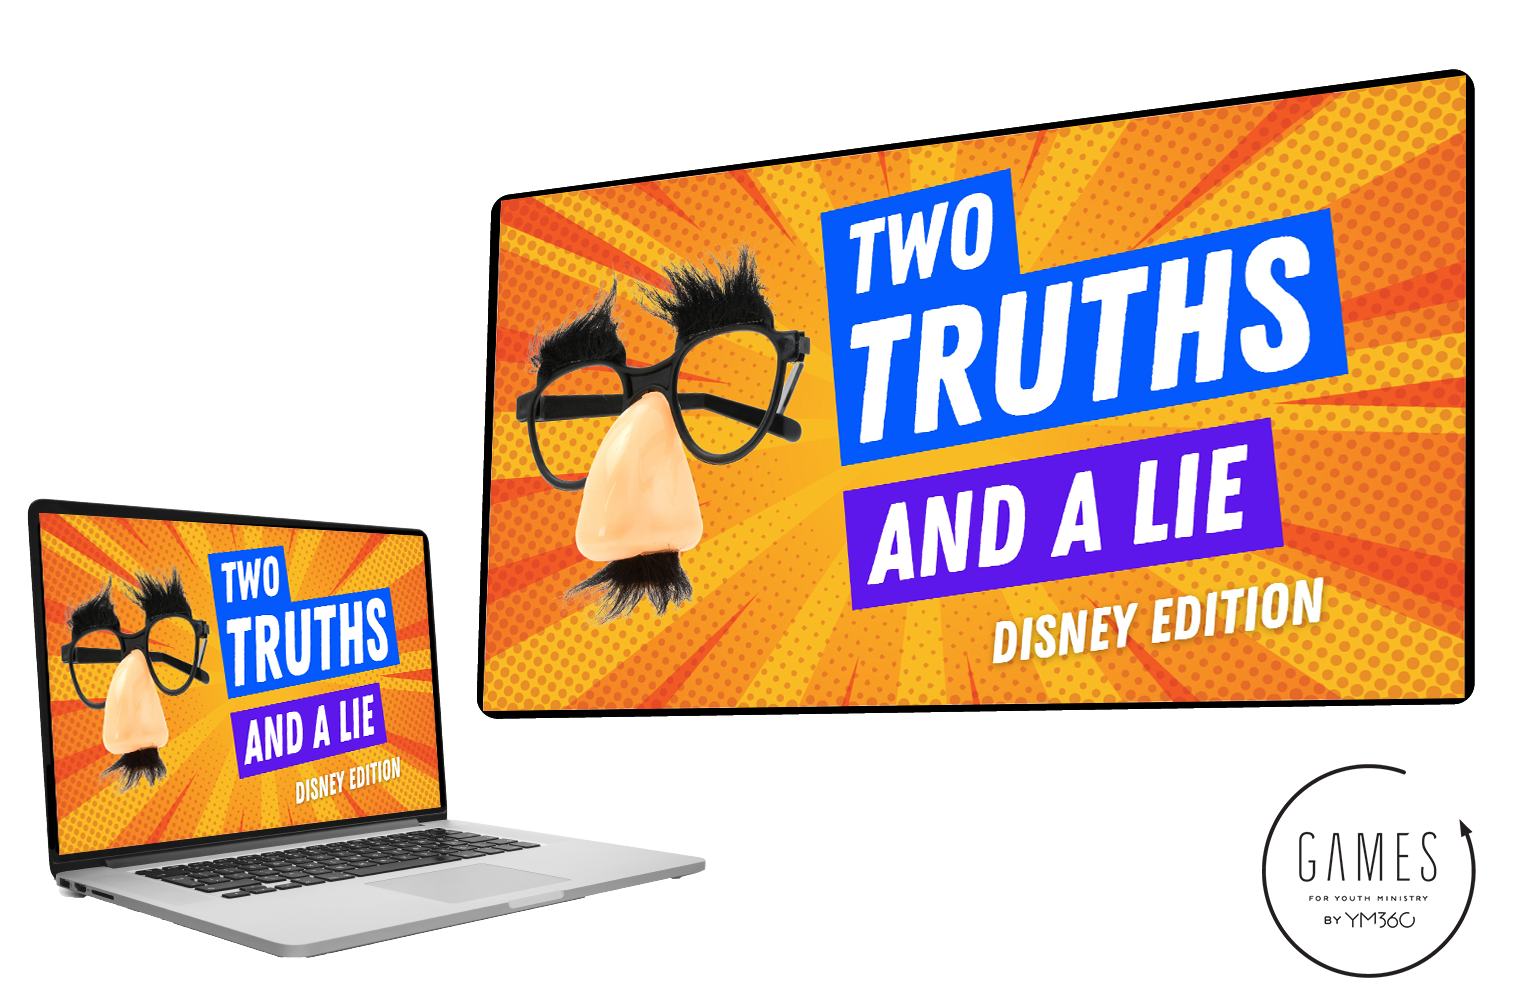 Two Truths And A Lie: Disney Edition